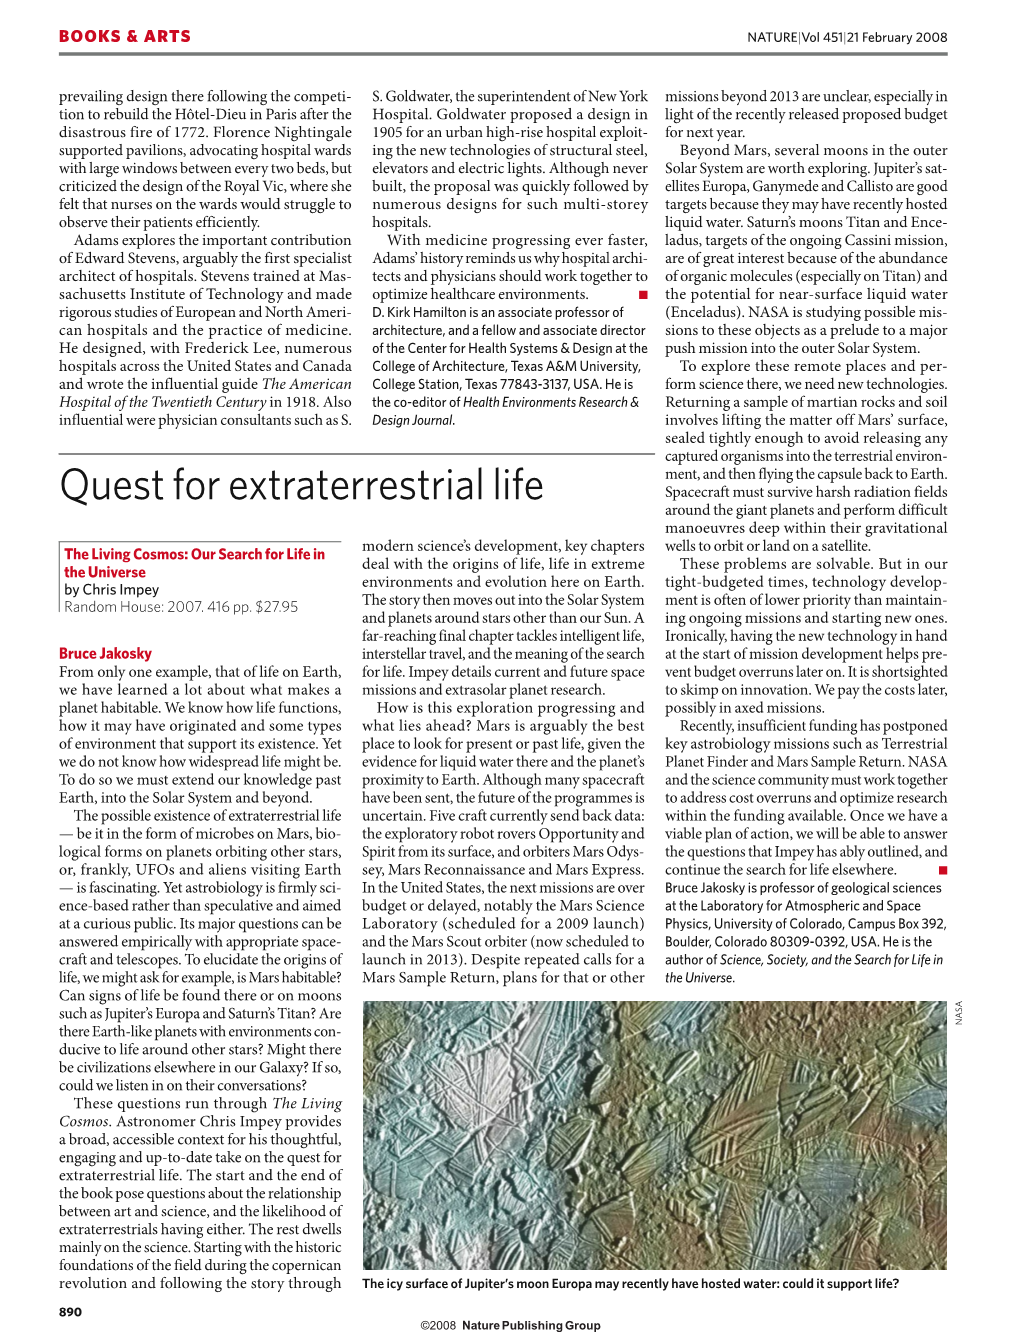 Quest for Extraterrestrial Life